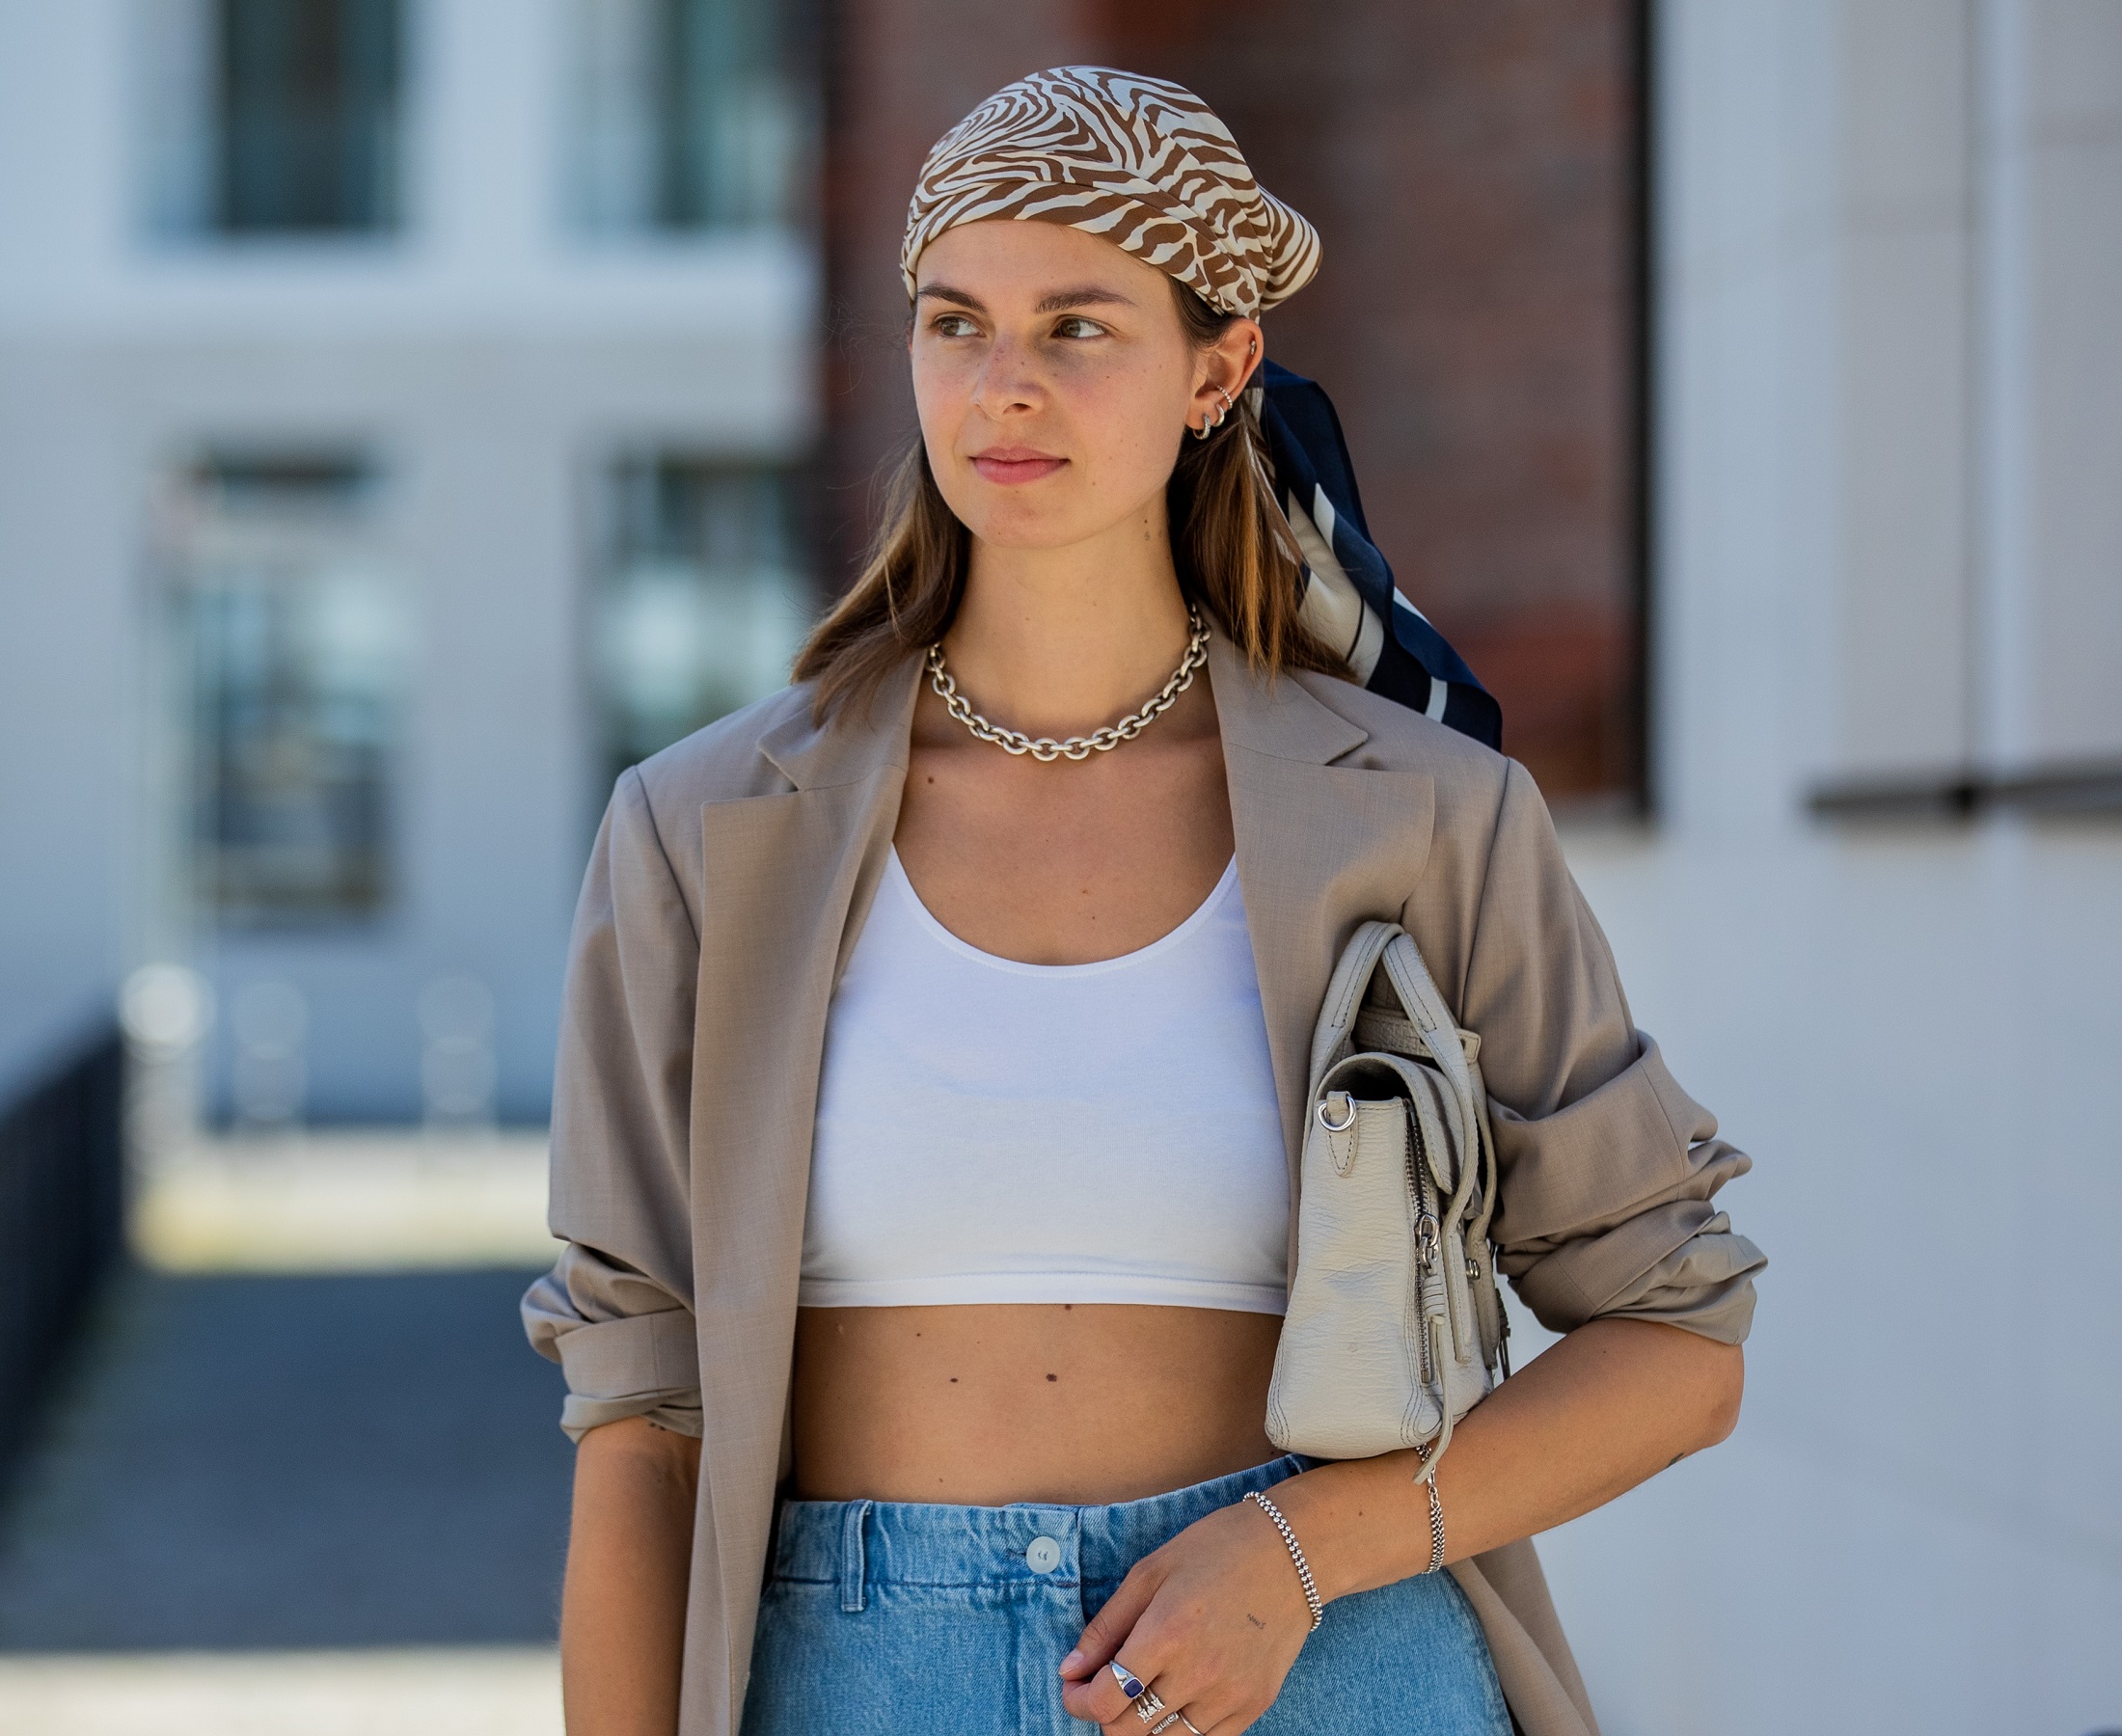 Head scarves – a grandma trend that is back in style again. How to style it to look hot?